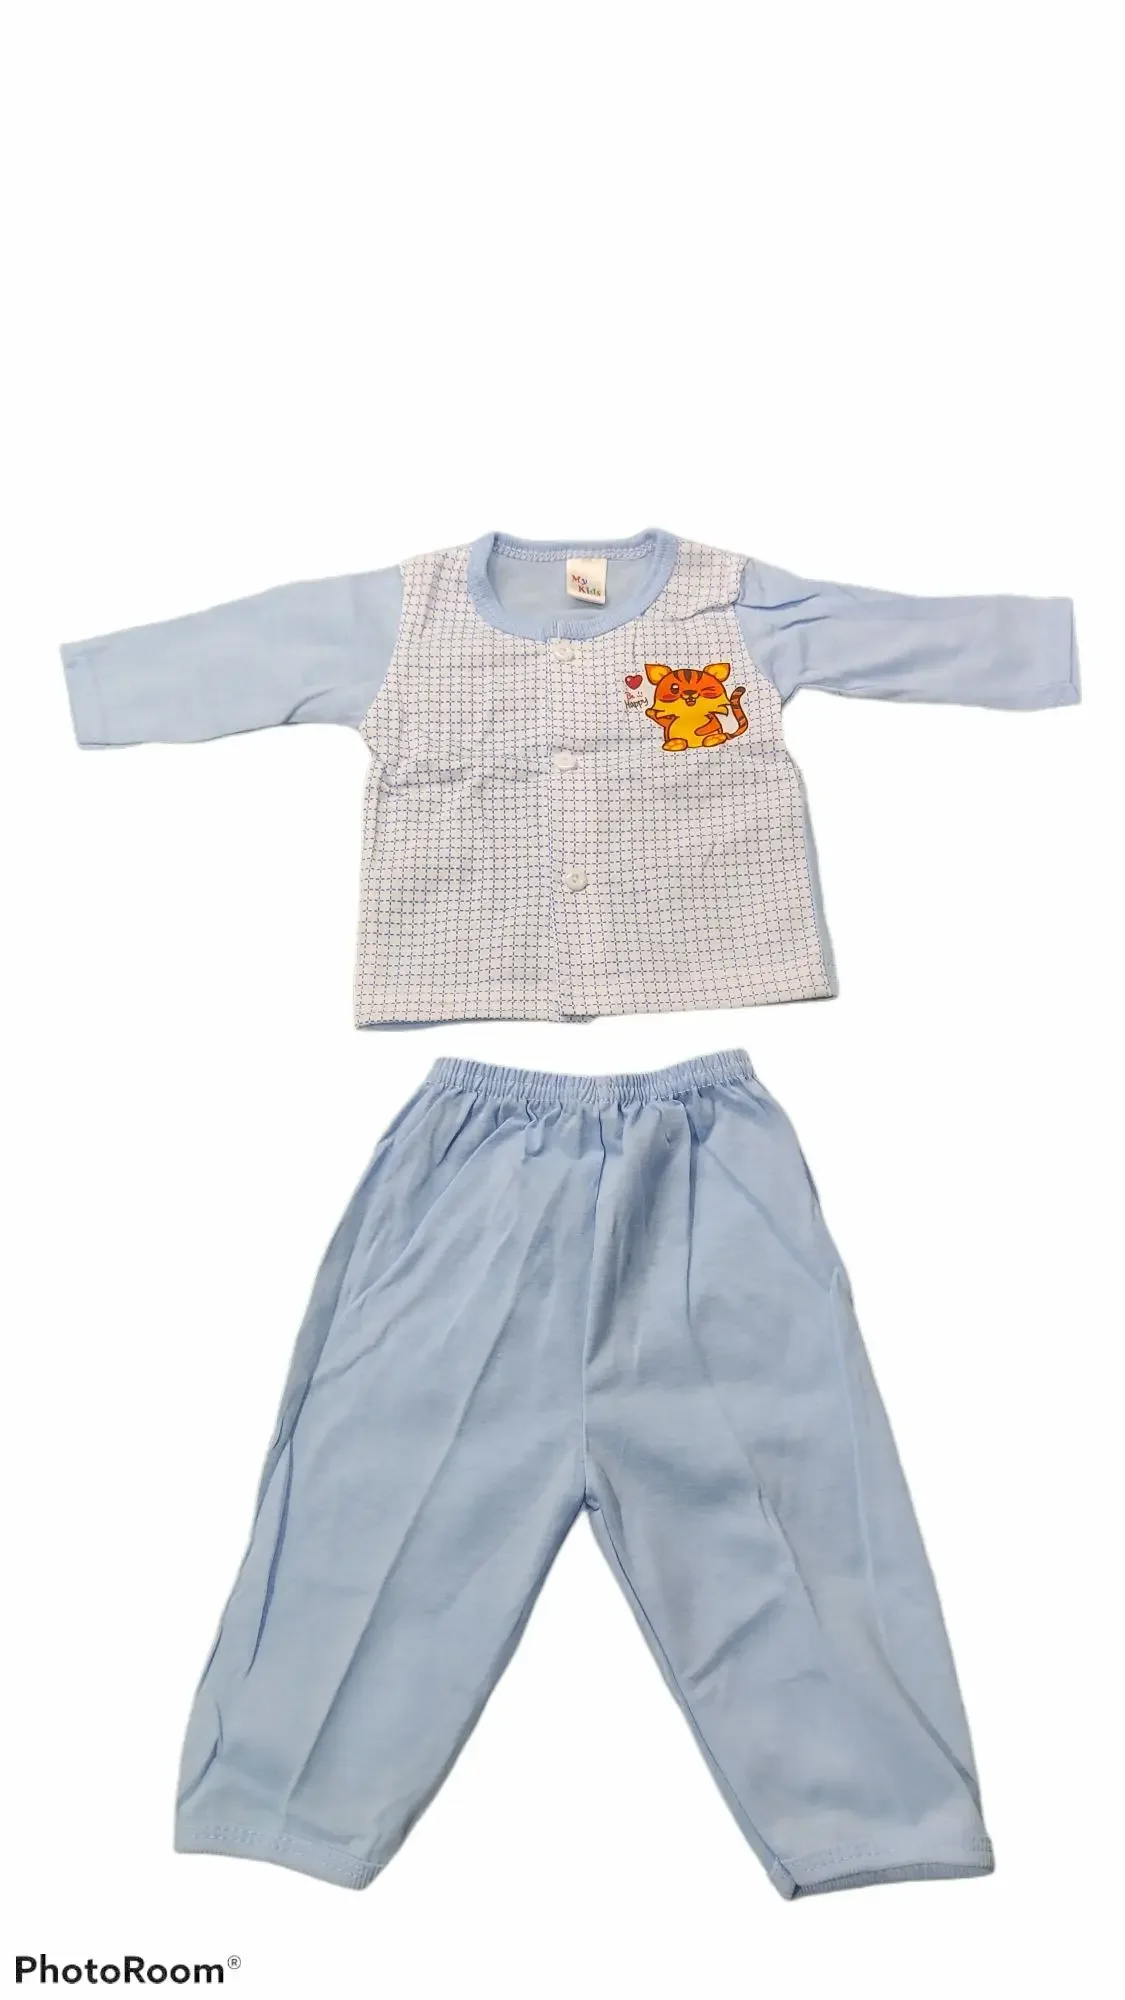 NEW BORN BABY CLOTHES SET NEW BORN 0 MONTH - 6 MONTH BAJU BABY MYKIDS (2)